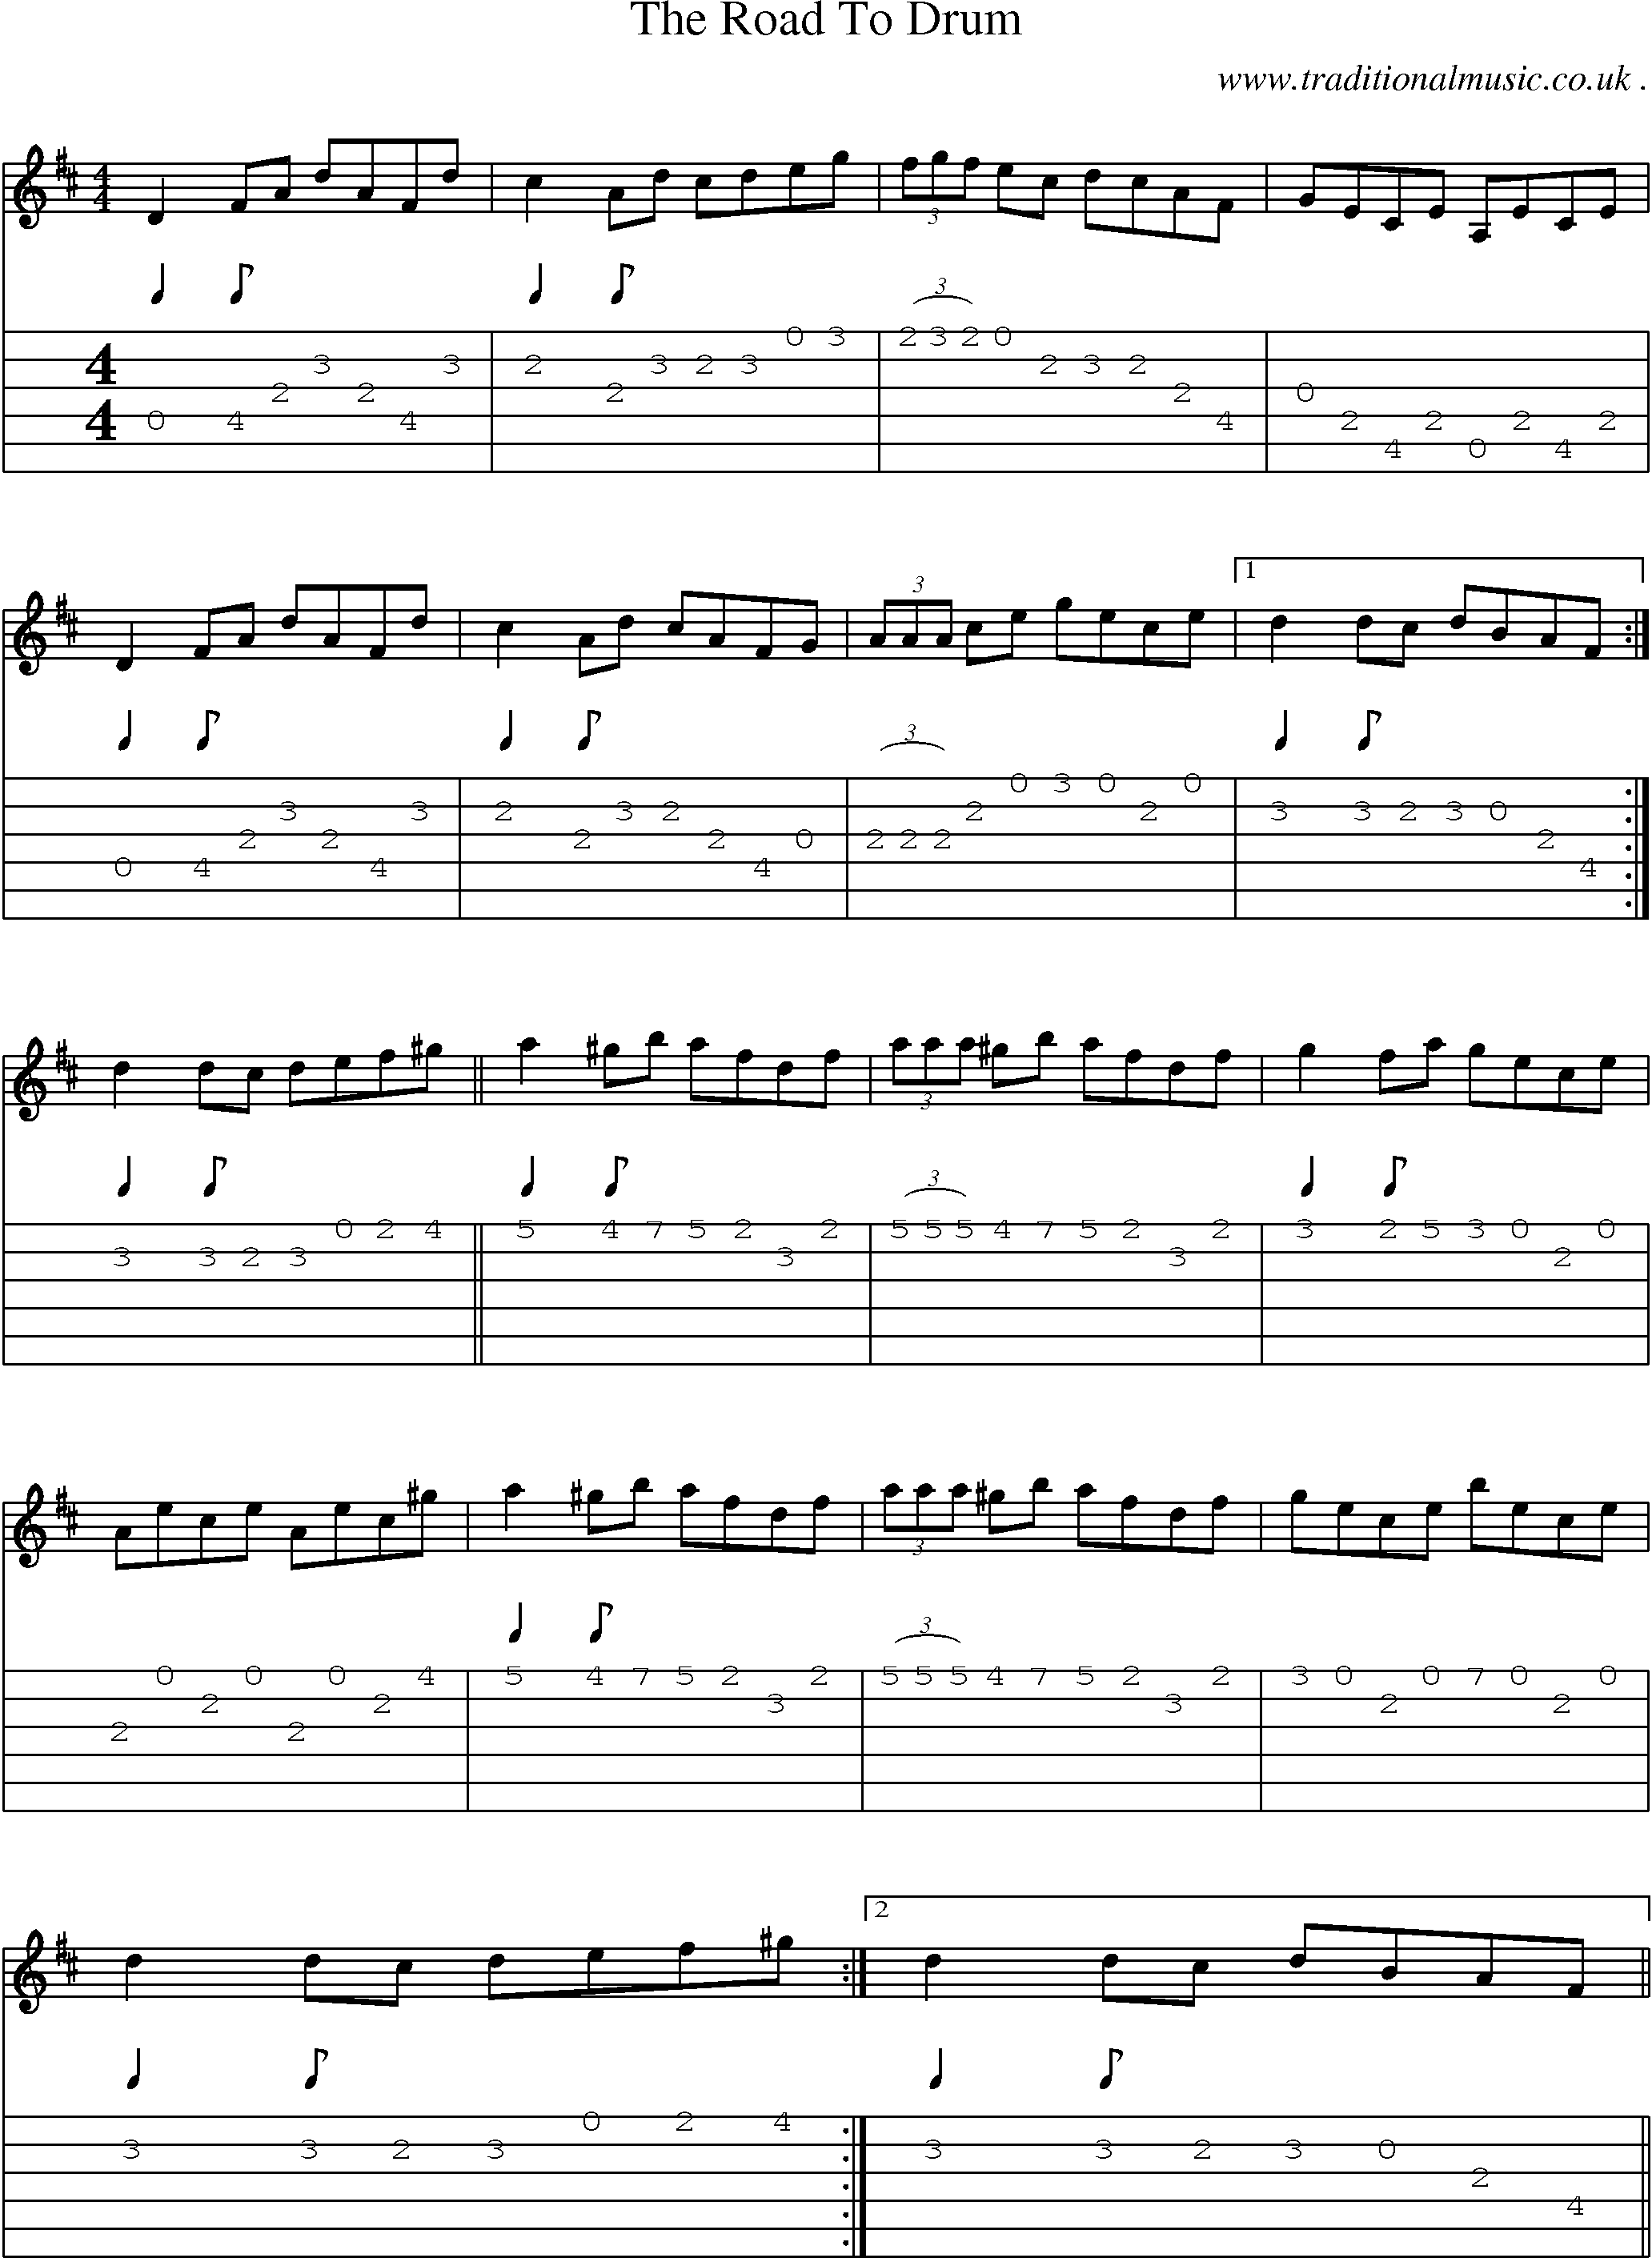 Sheet-Music and Guitar Tabs for The Road To Drum